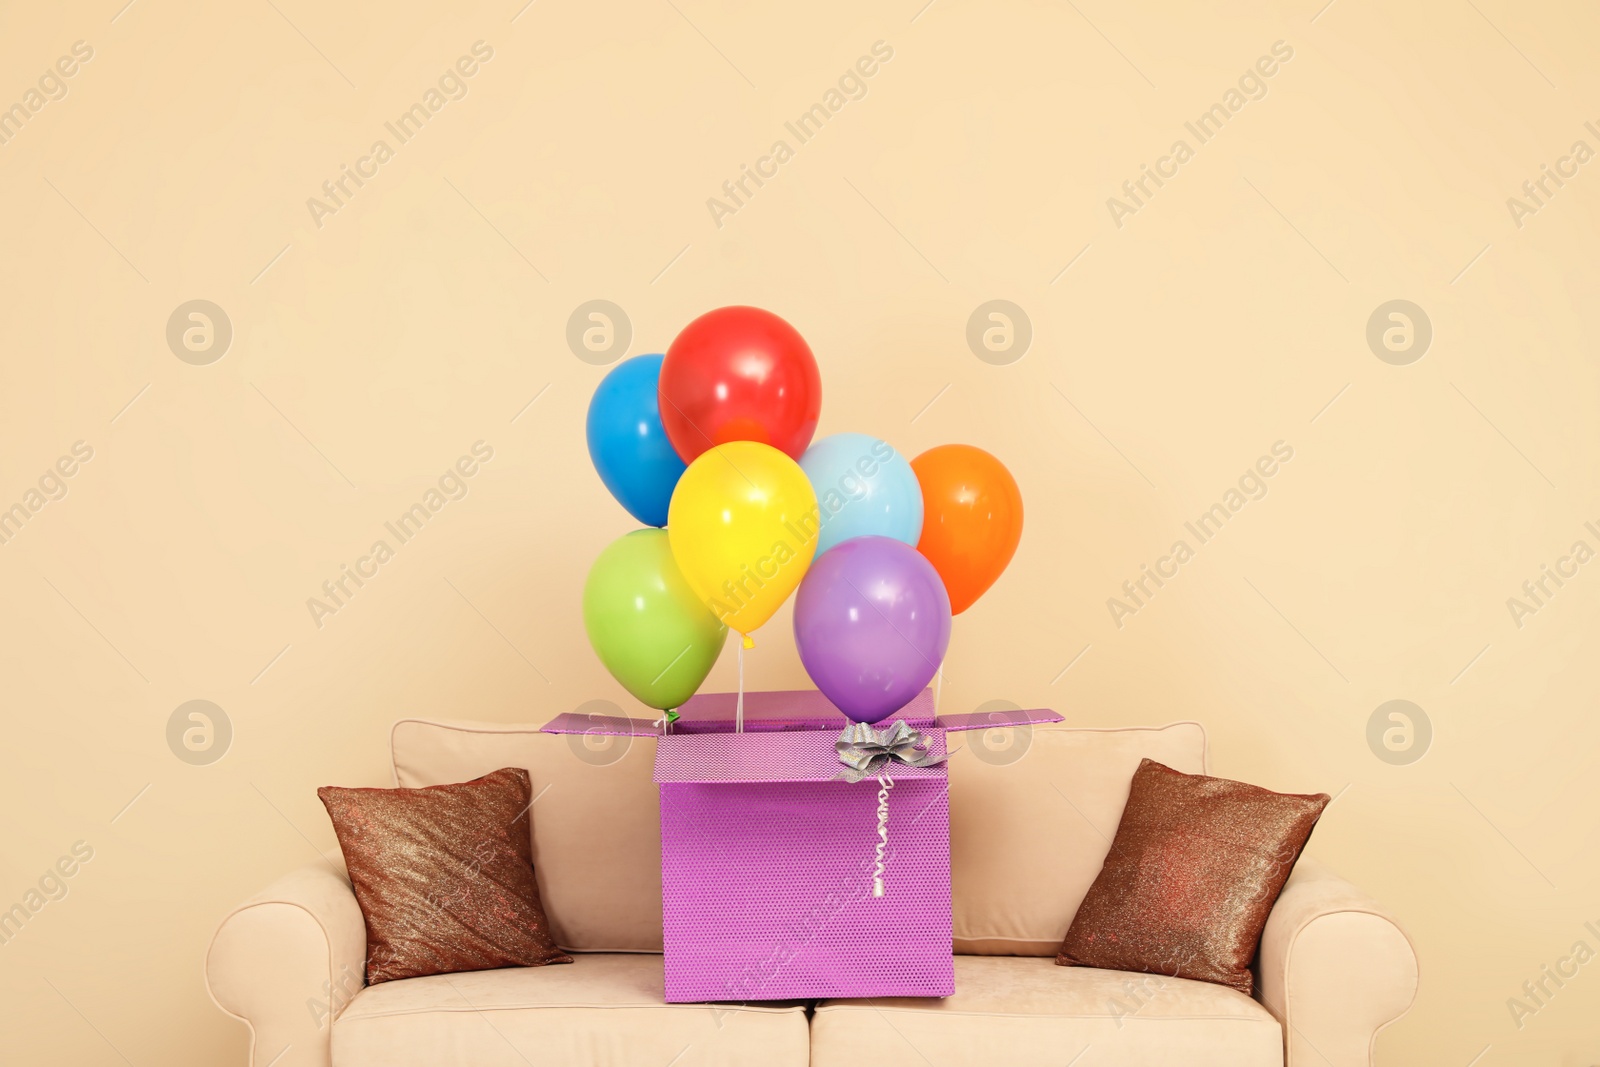 Photo of Gift box with bright air balloons on sofa against color background